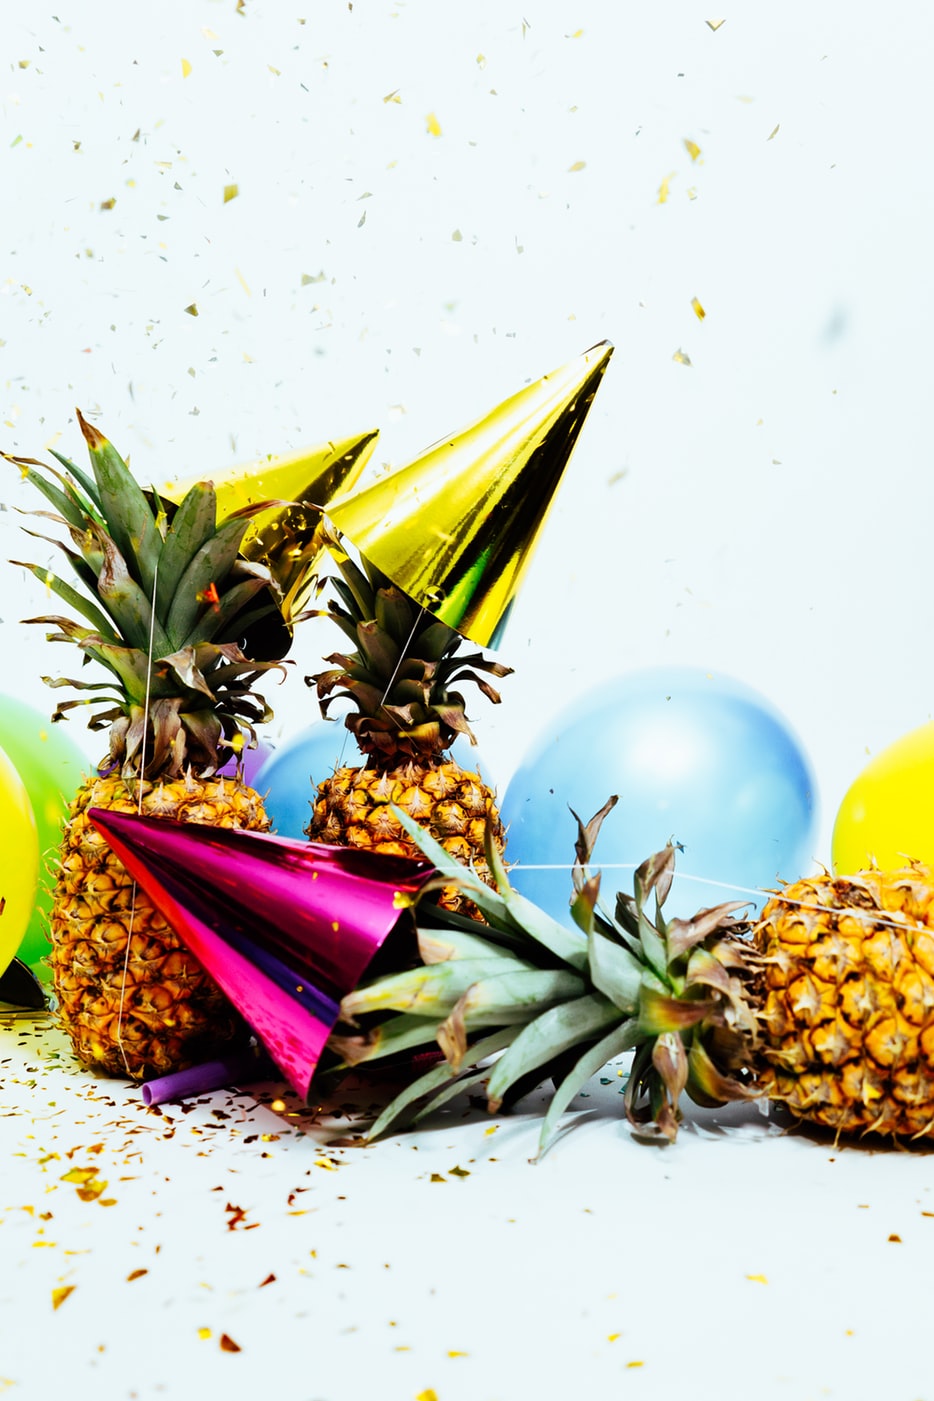 Bright party hats and balloons rests on pineapples.